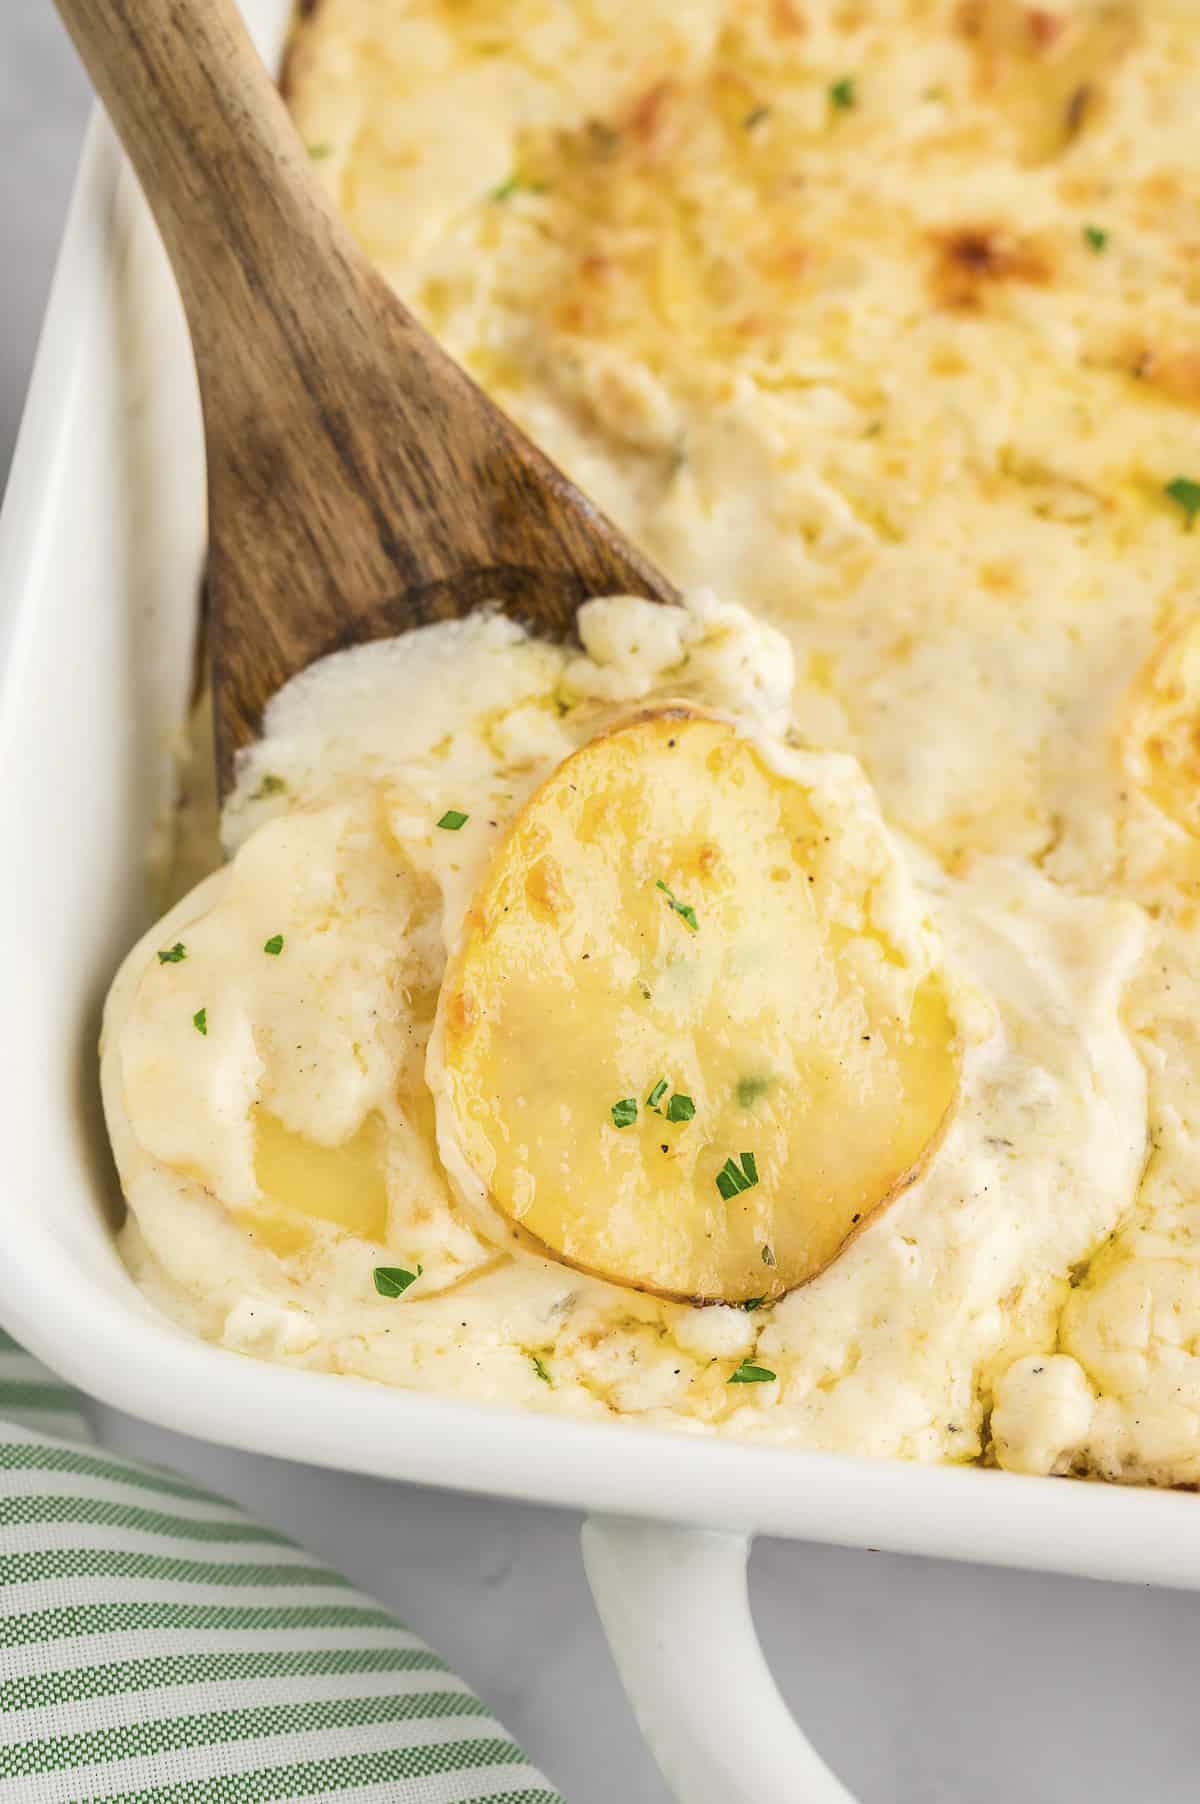 Scalloped potatoes with white cheddar in baking dish.